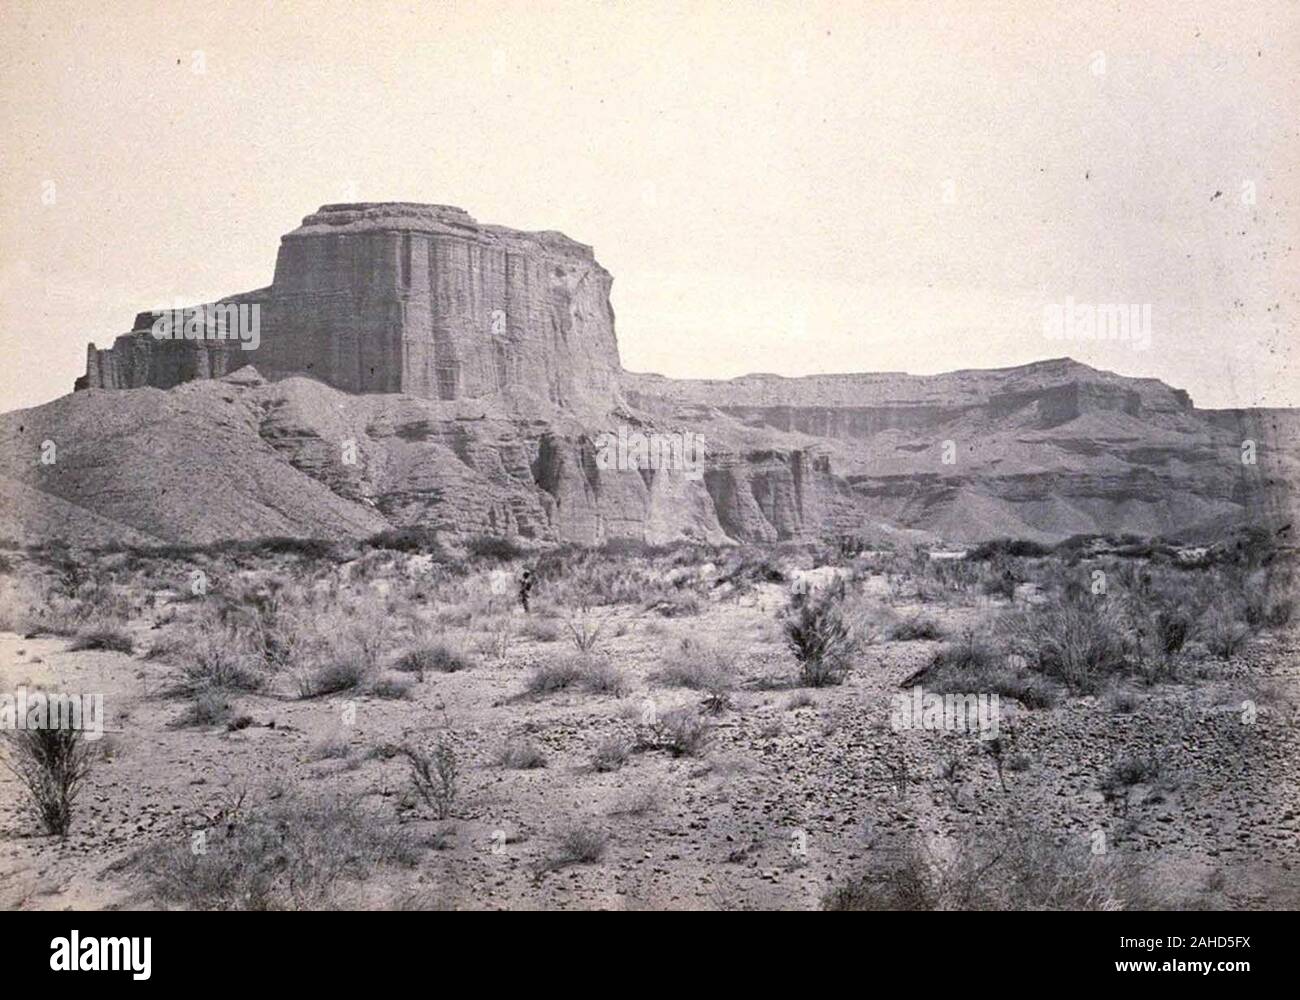 American West in vintage Photo 1860 s-1870 s Stockfoto